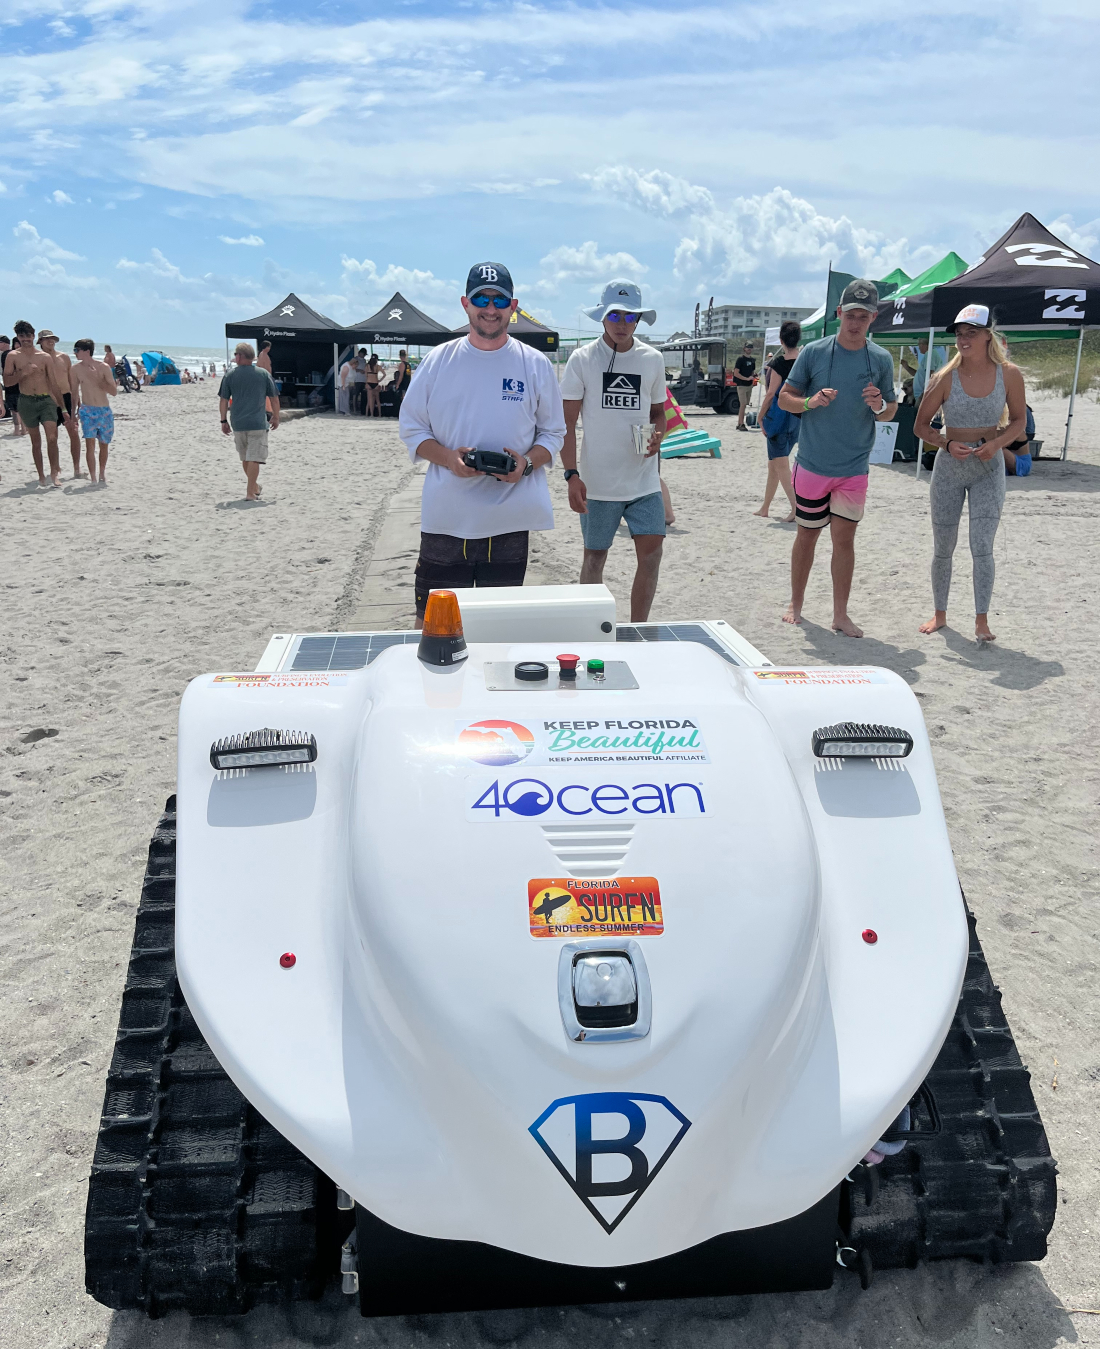 BeBot roaming beaches with crowd and controller